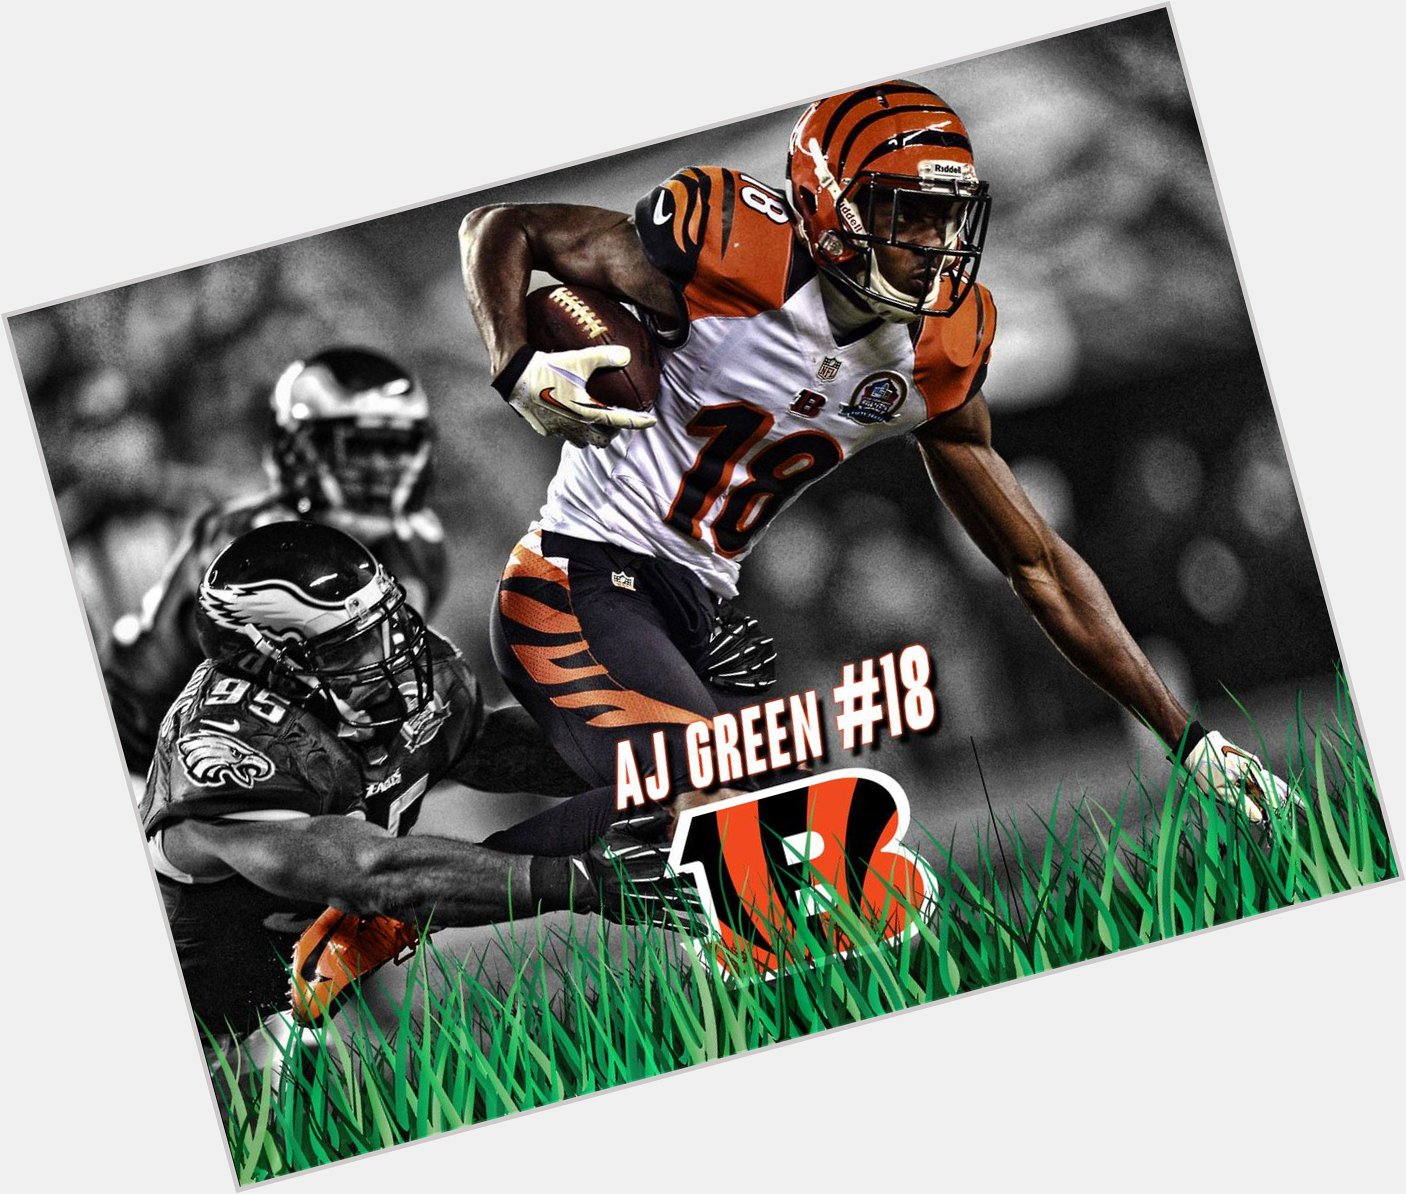 Happy Birthday to WR AJ Green! hope to see another monster year from you! 